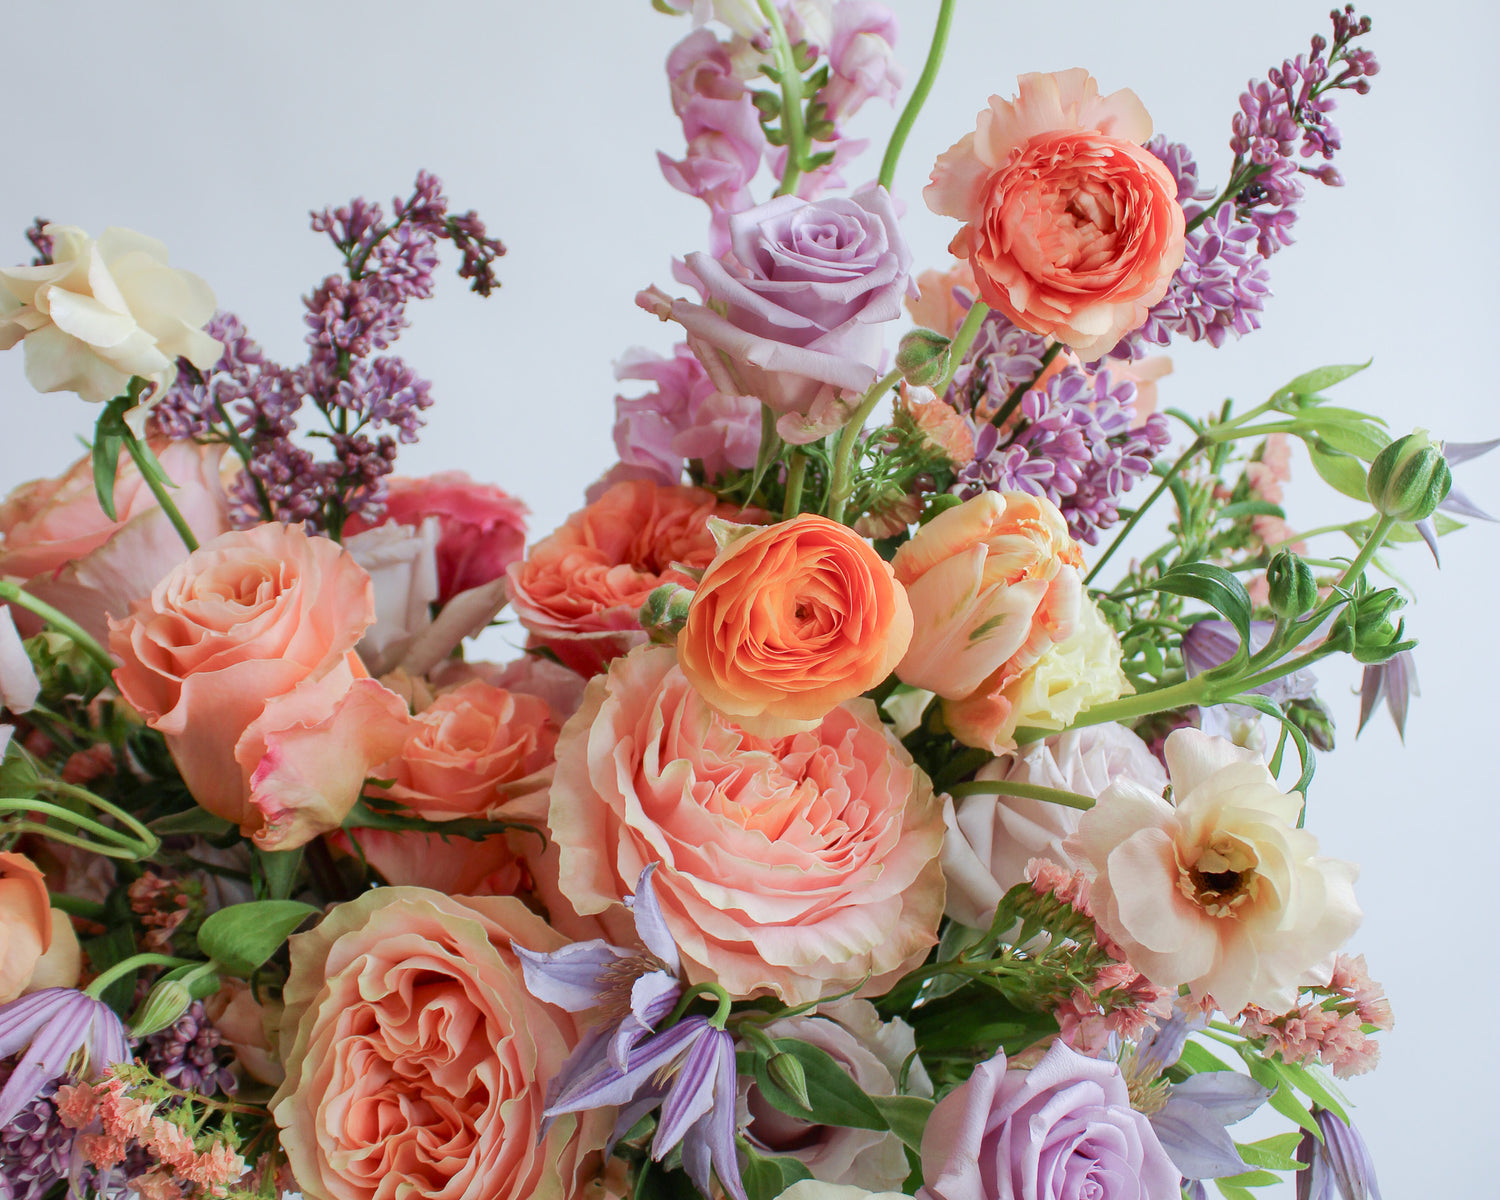 Close-up of a flower arrangement in a pink vase on a marble table with peach, orange, purple, and lavender flowers, including rose, clematis, hyacinth, delphinium, anemone, tulip, and status. The backdrop is white.